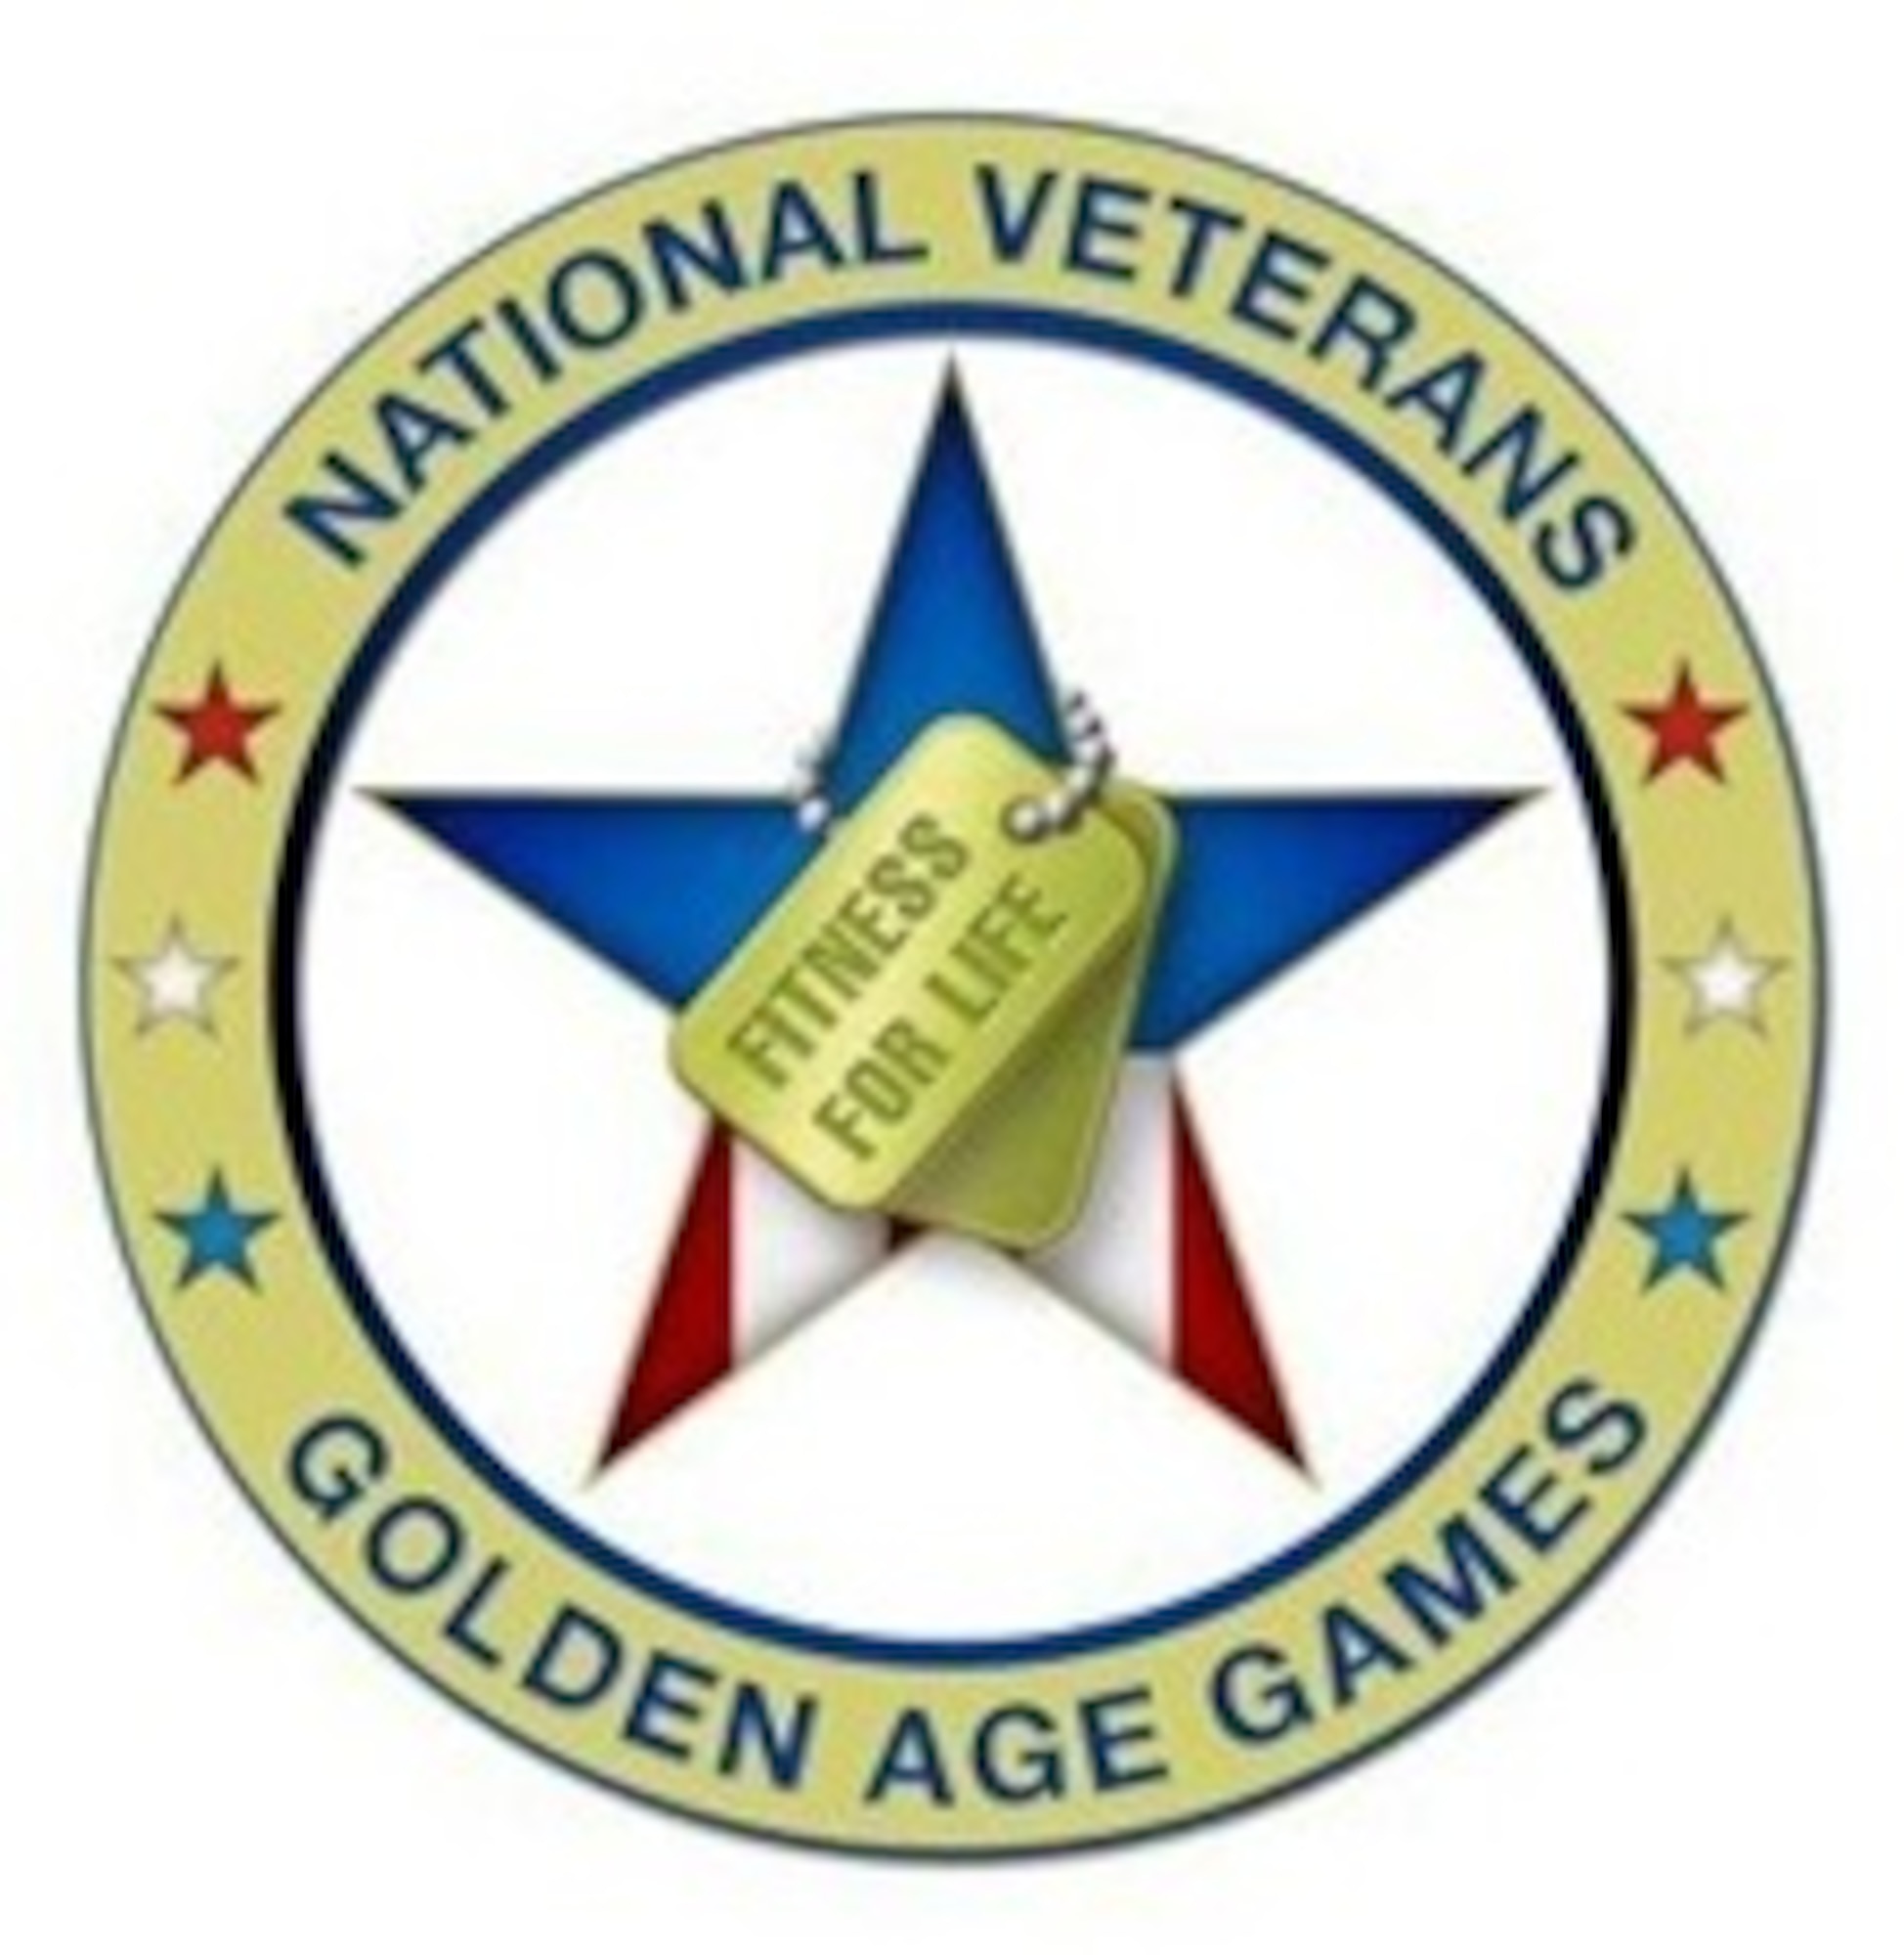 An online application is now available for people wishing to volunteer during the 32nd National Veterans Golden Age Games. The games will take place Aug. 3-8 in Albuquerque.